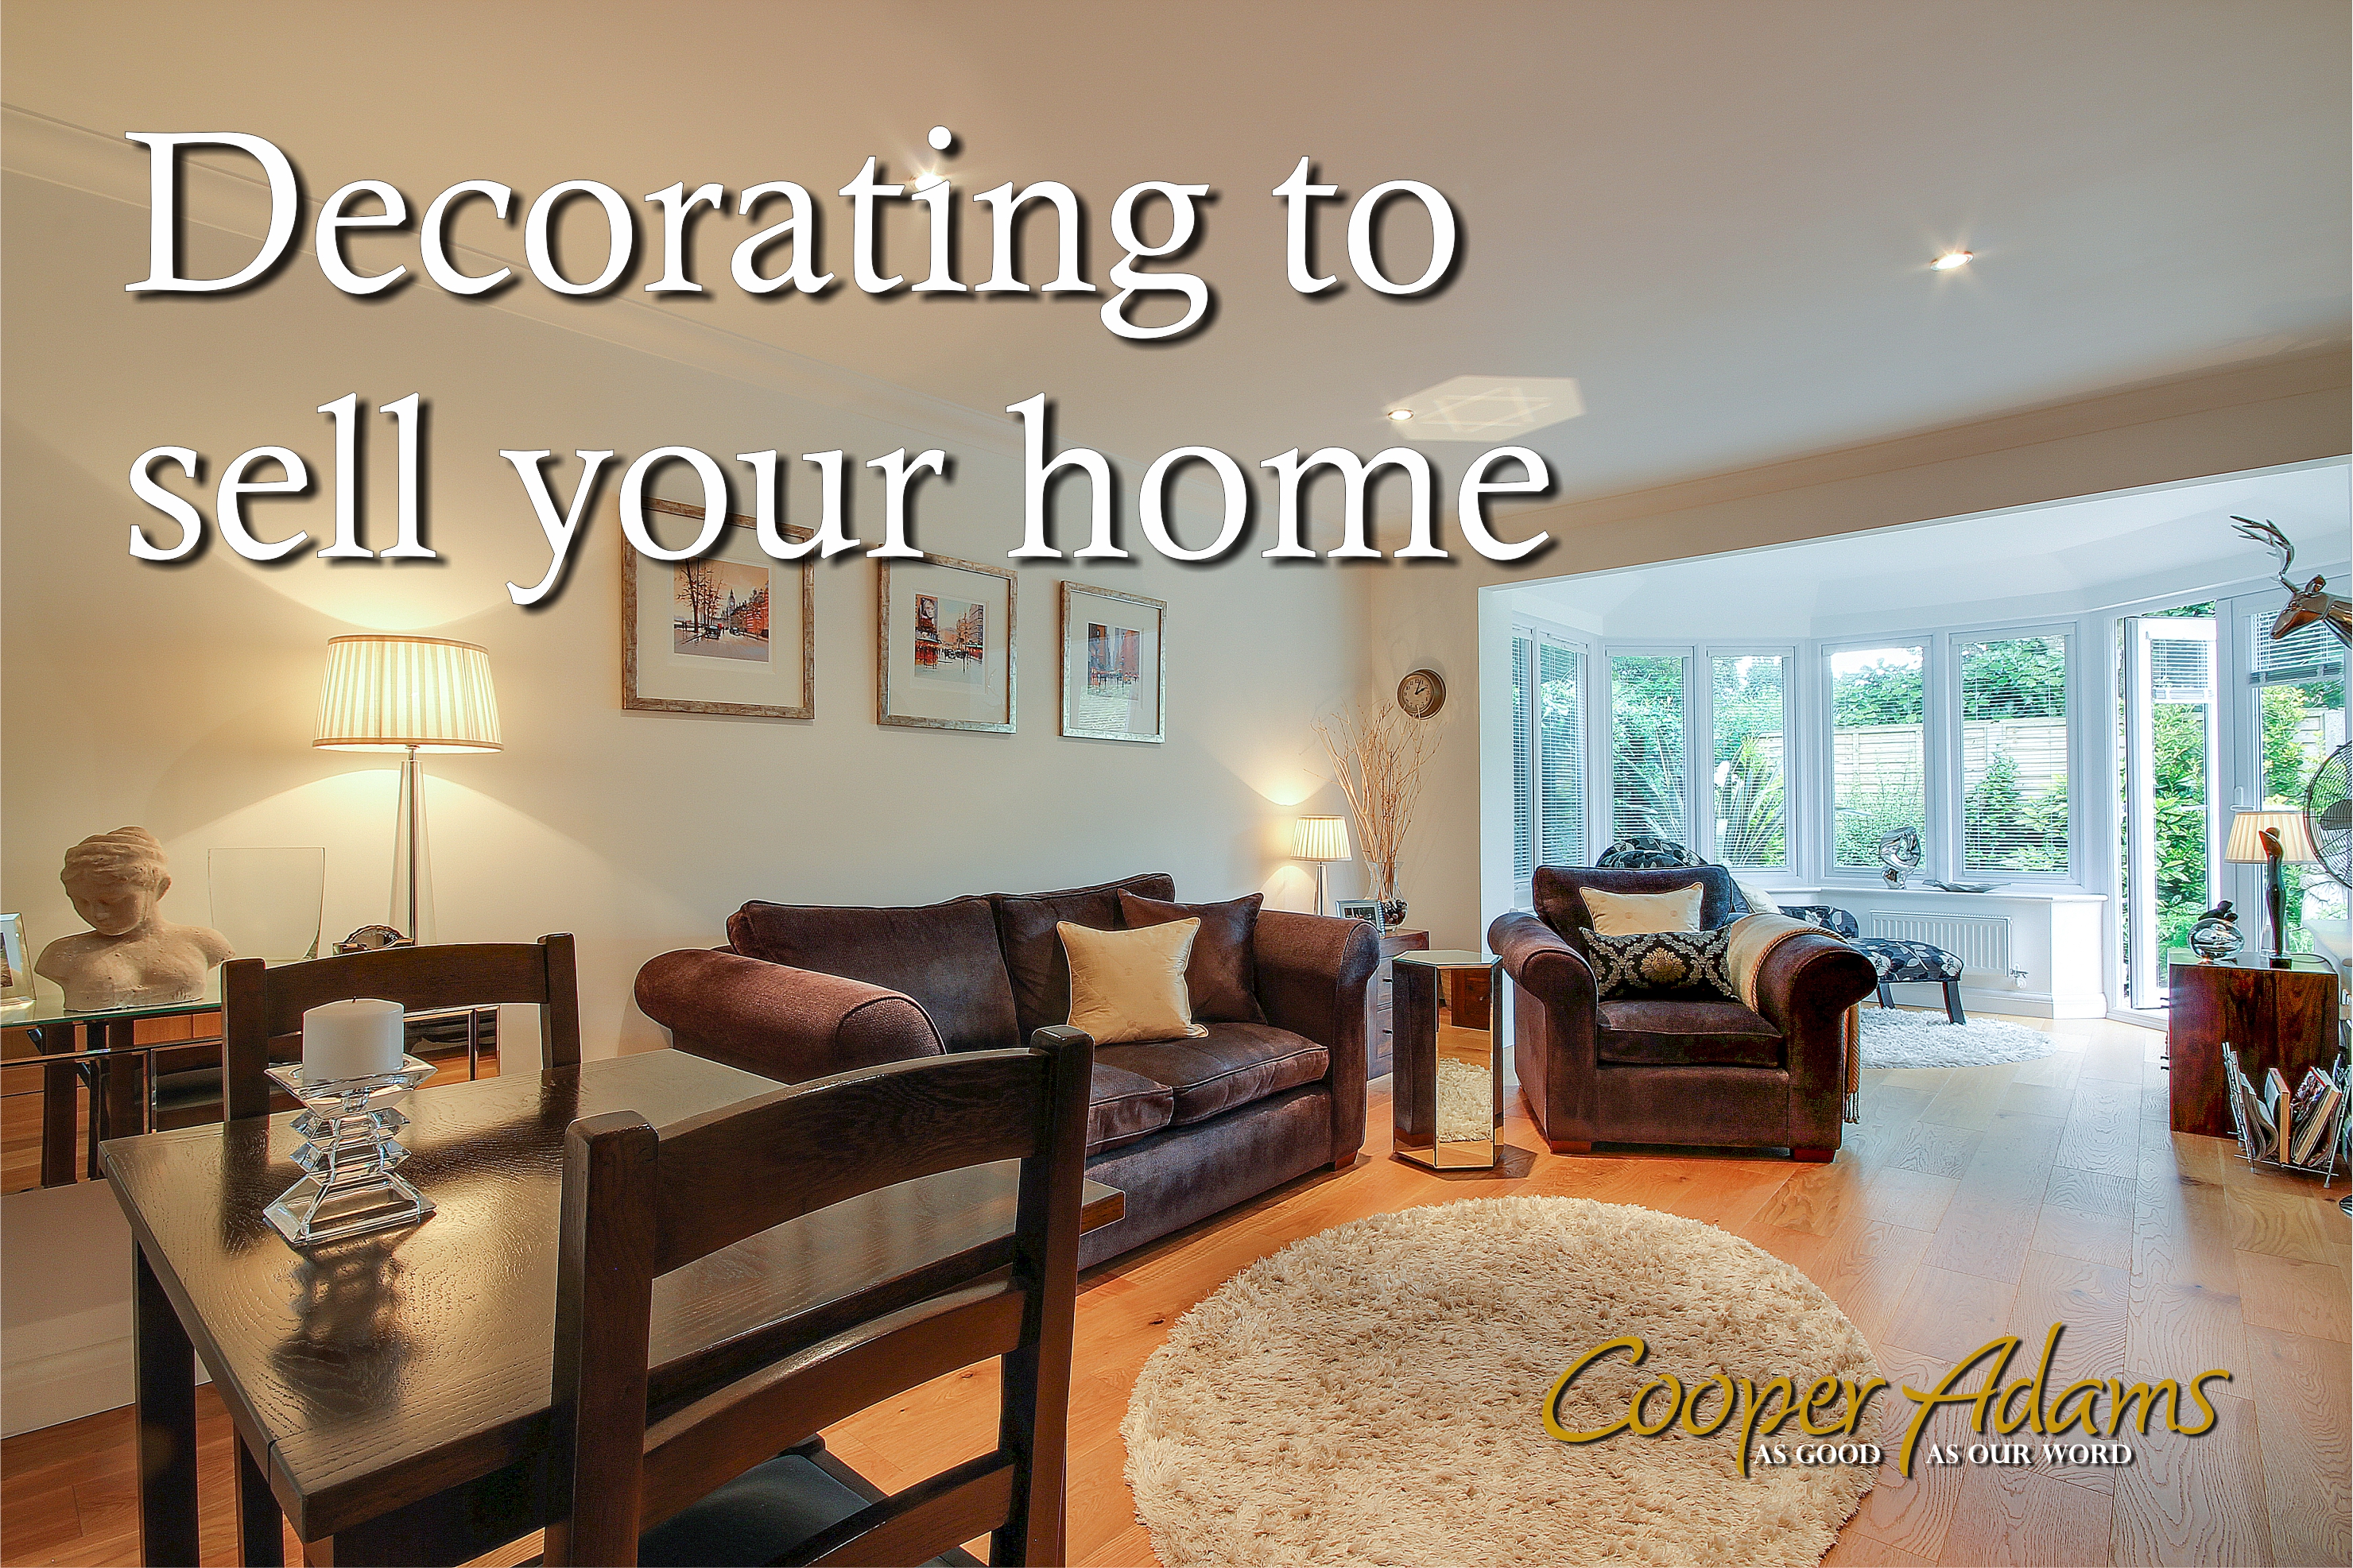 Decorating to sell your home